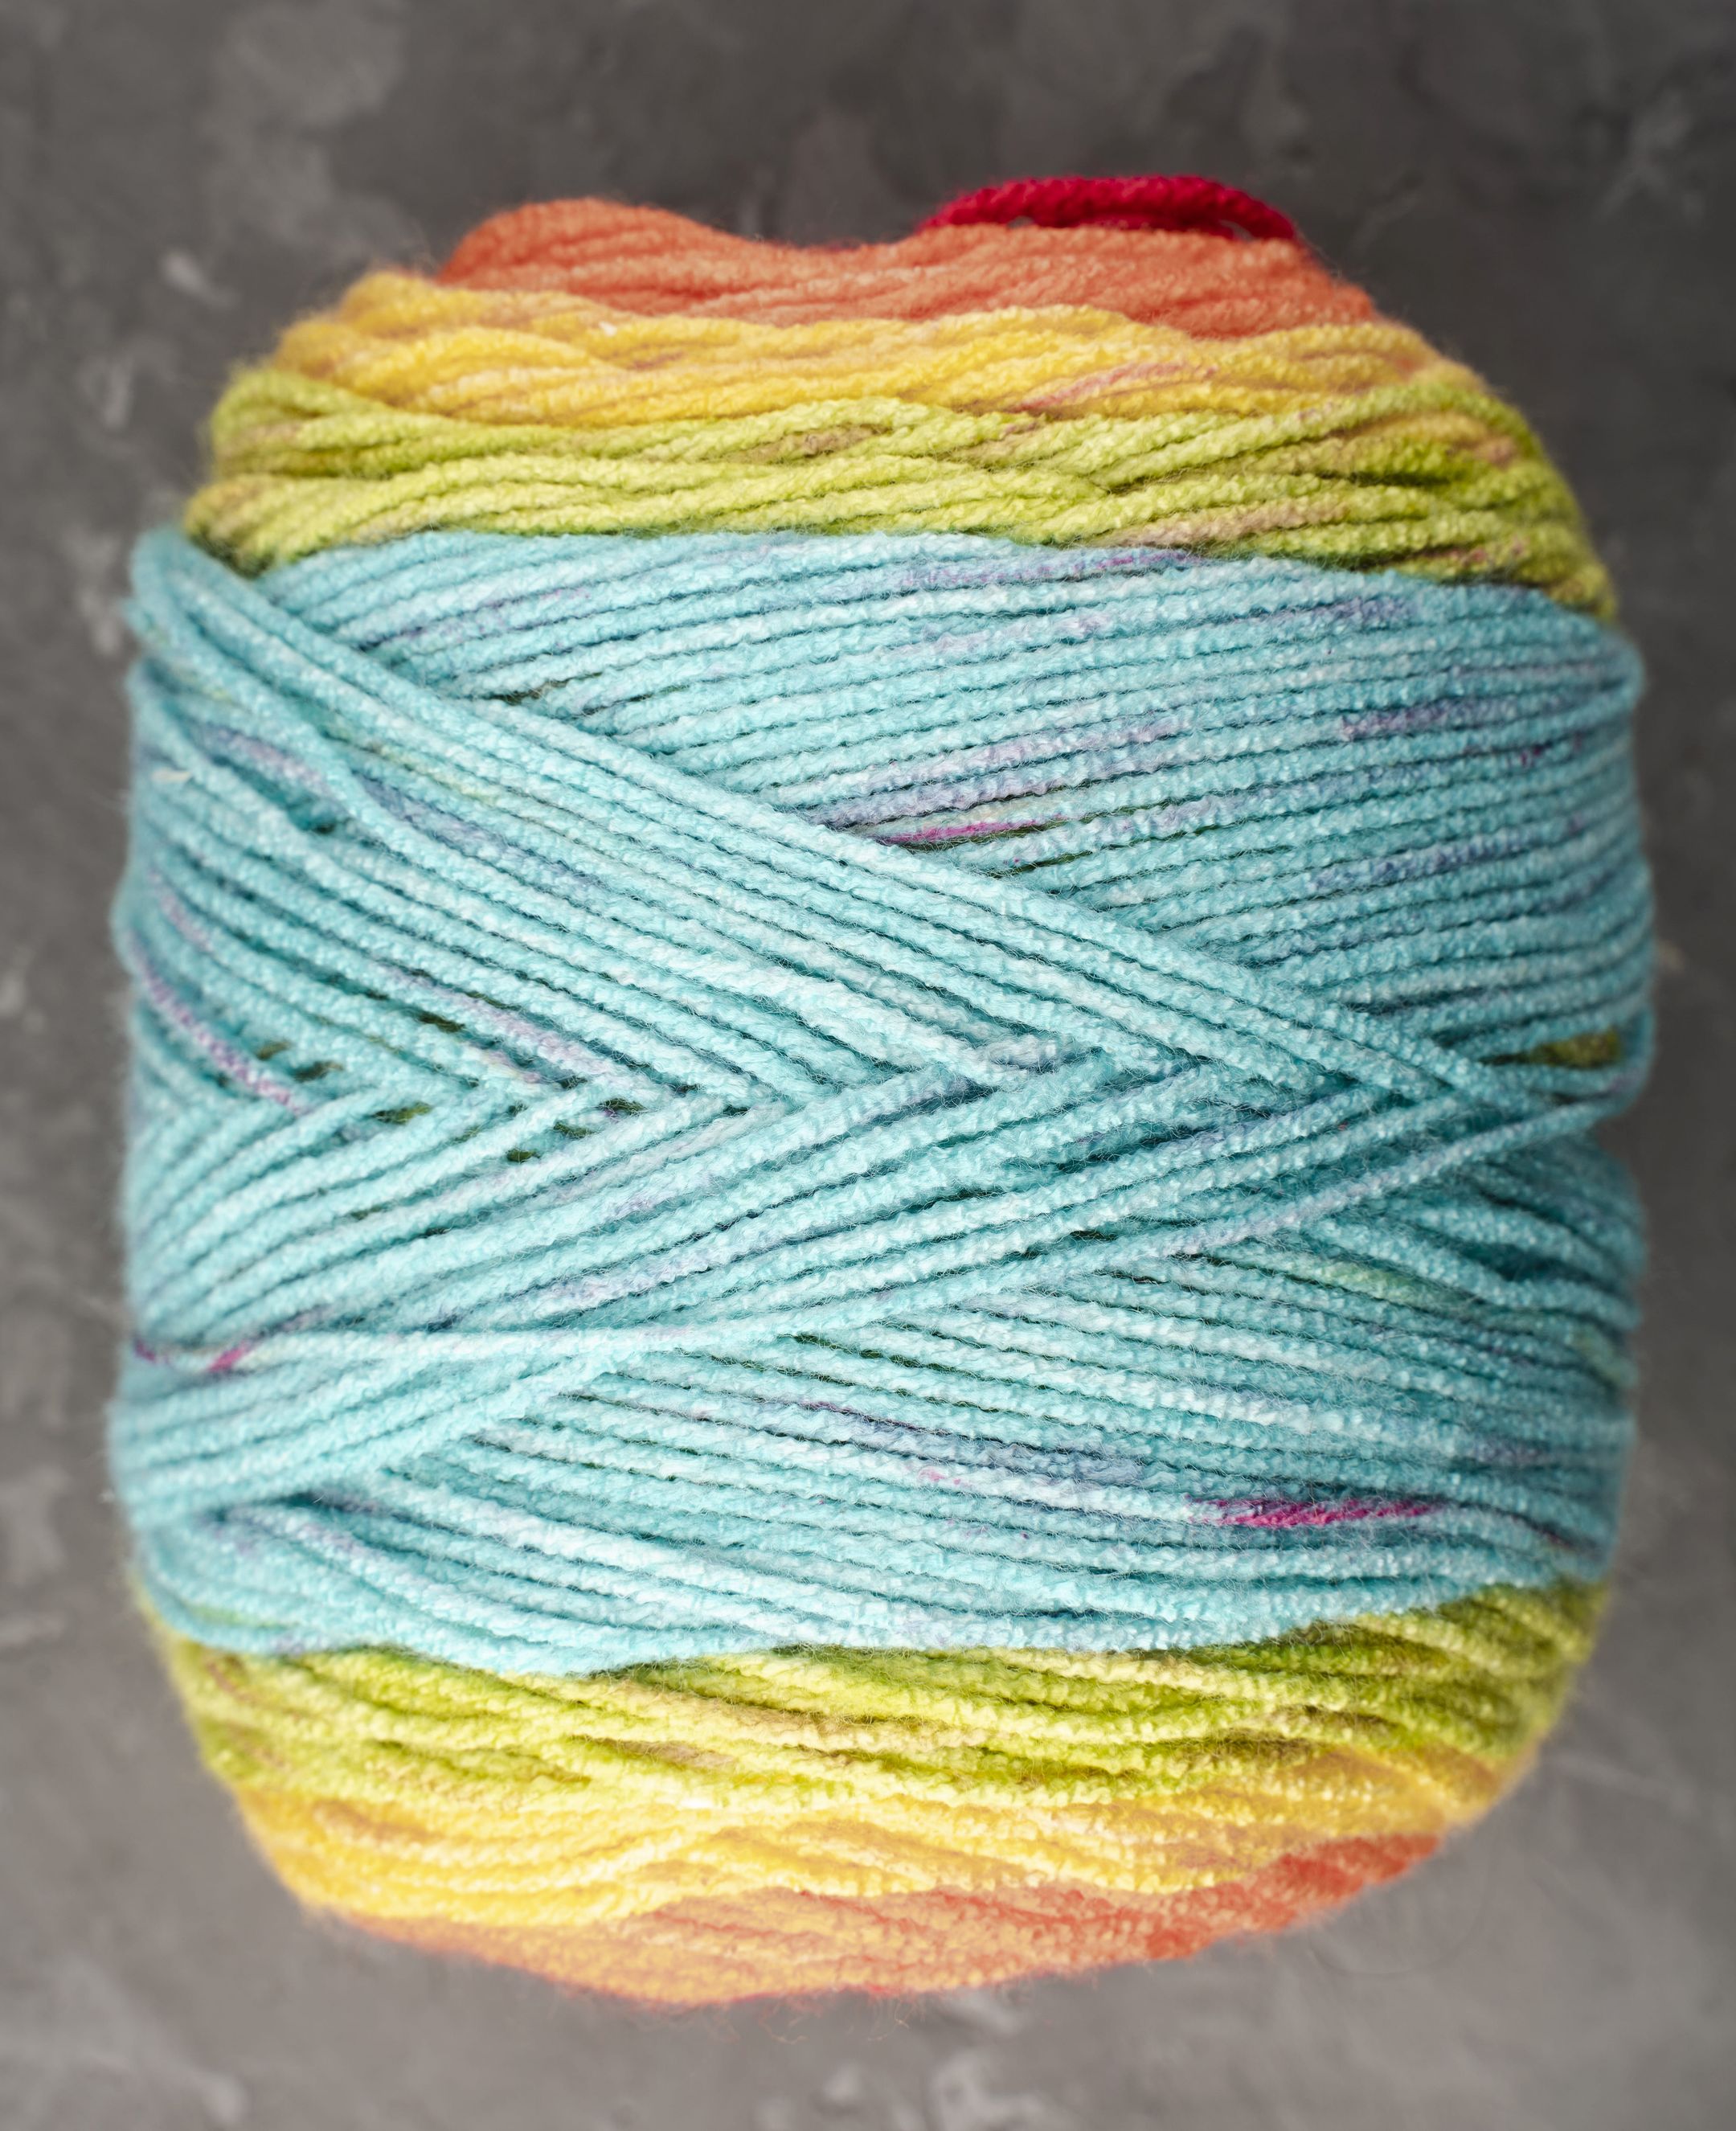 Washing and Caring for Acrylic Yarn Projects